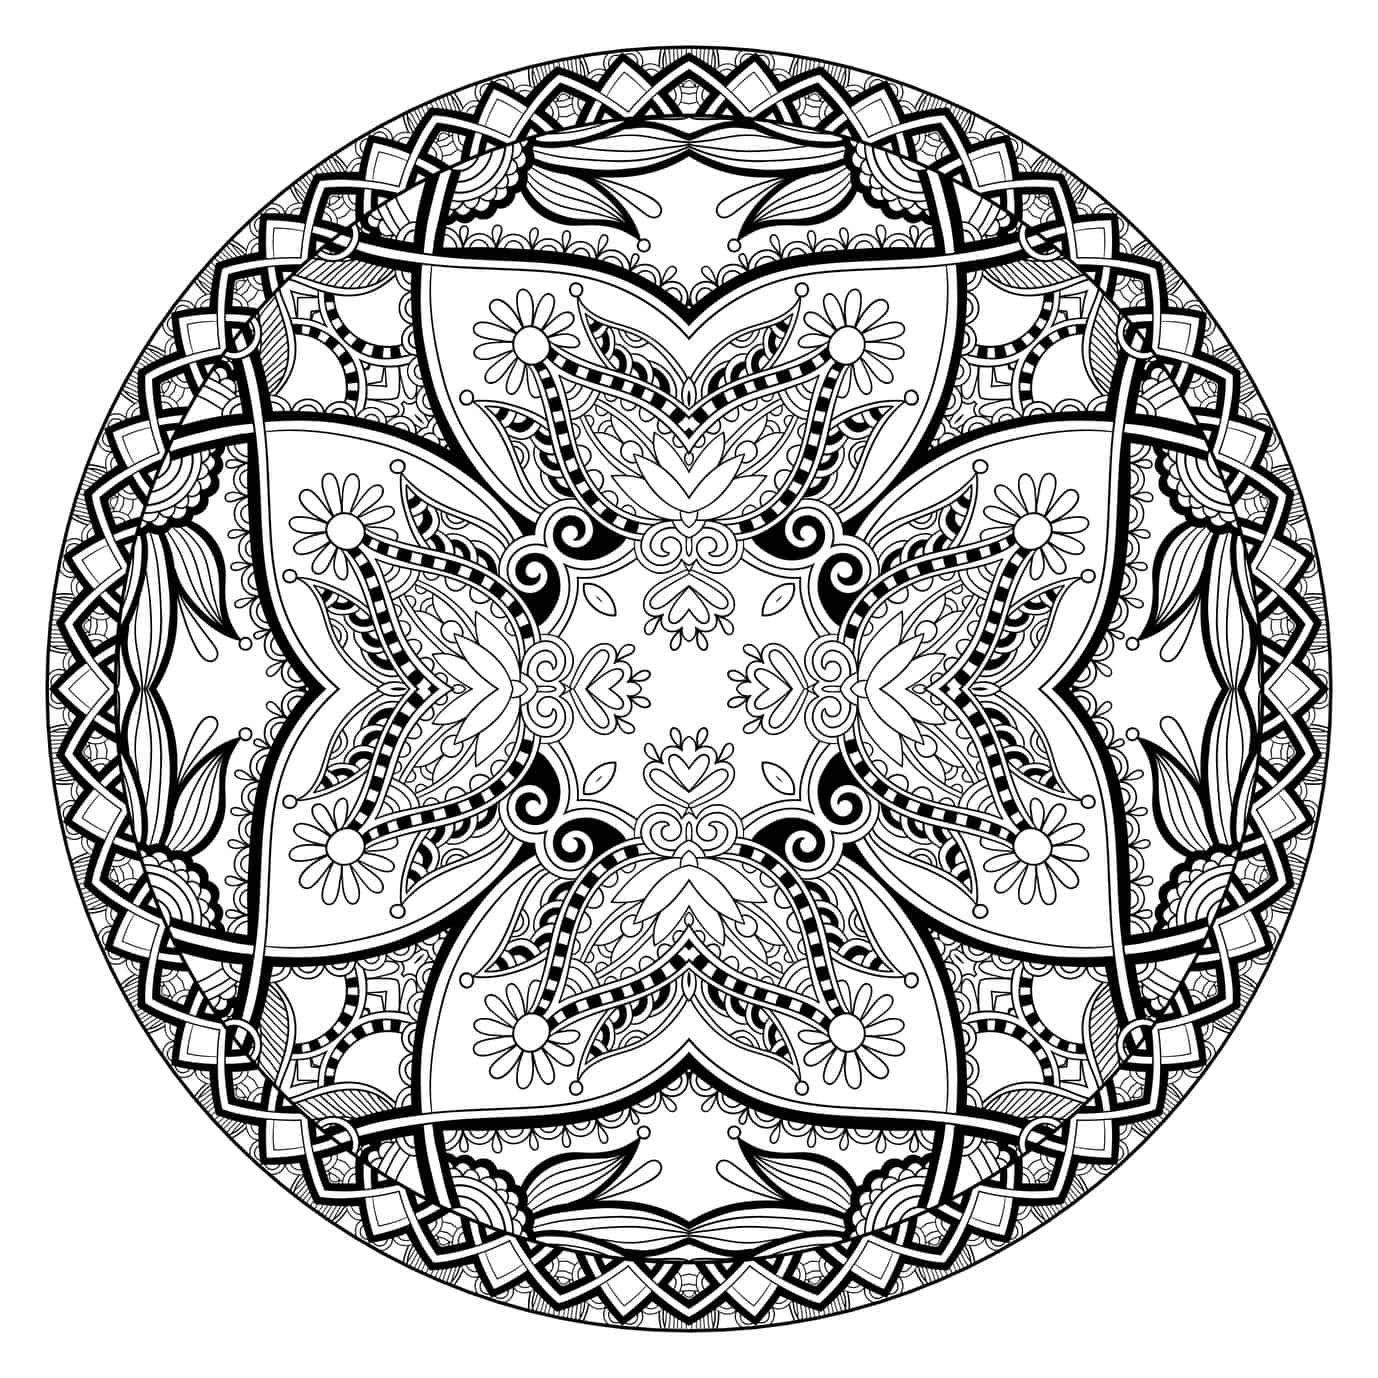 These printable abstract coloring pages relieve stress and help you meditate